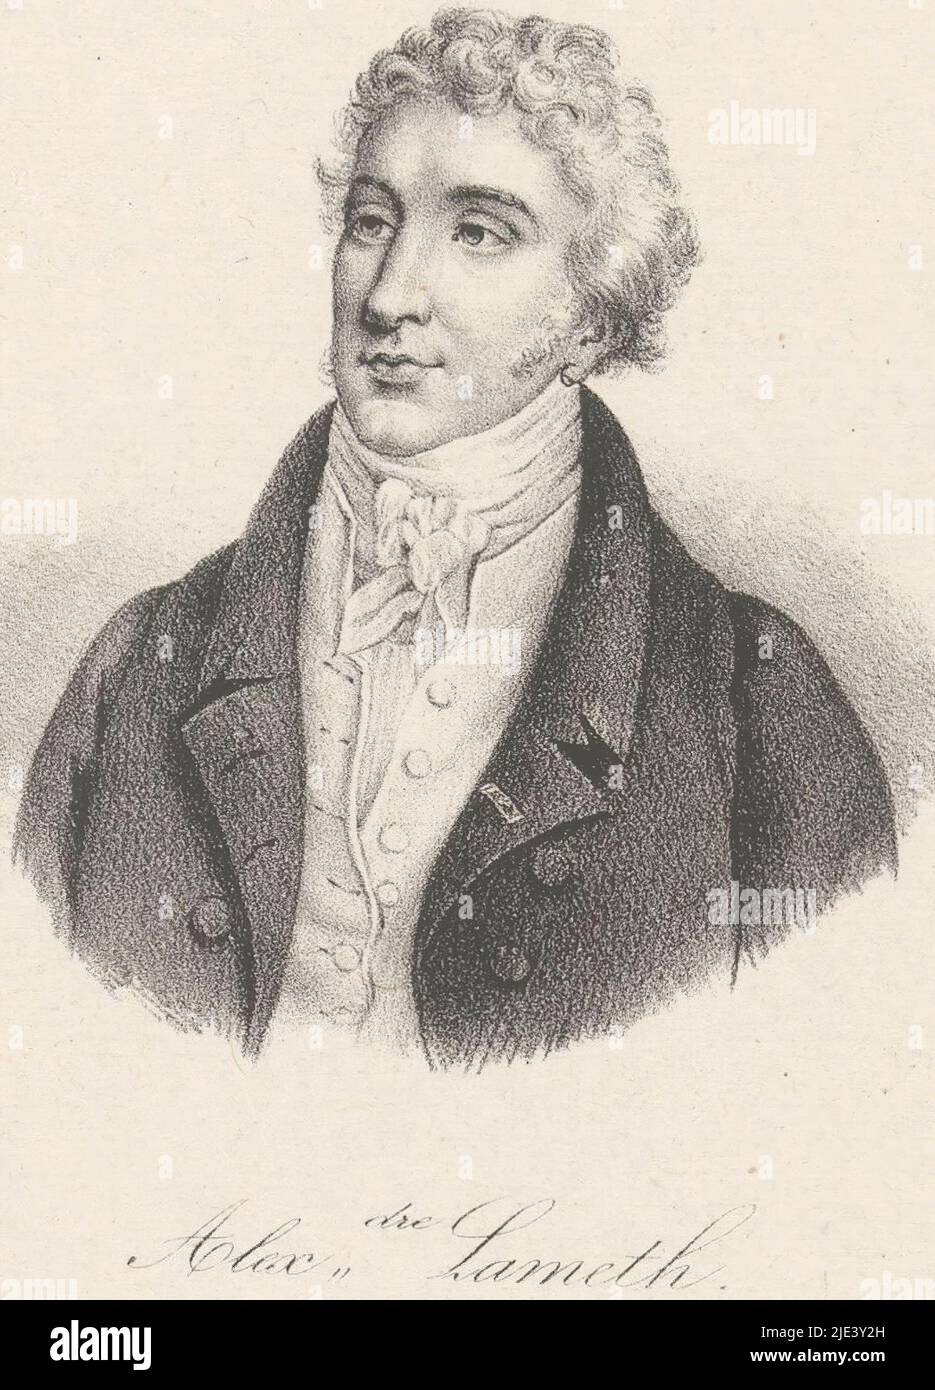 Portrait of Alexandre de Lameth, anonymous, veuve Delpech (Naudet) (possibly), in or after 1818 - in or before 1842, print maker: anonymous, printer: veuve Delpech (Naudet), (possibly), Paris, in or after 1818 - in or before 1842, paper, h 278 mm - w 180 mm Stock Photo